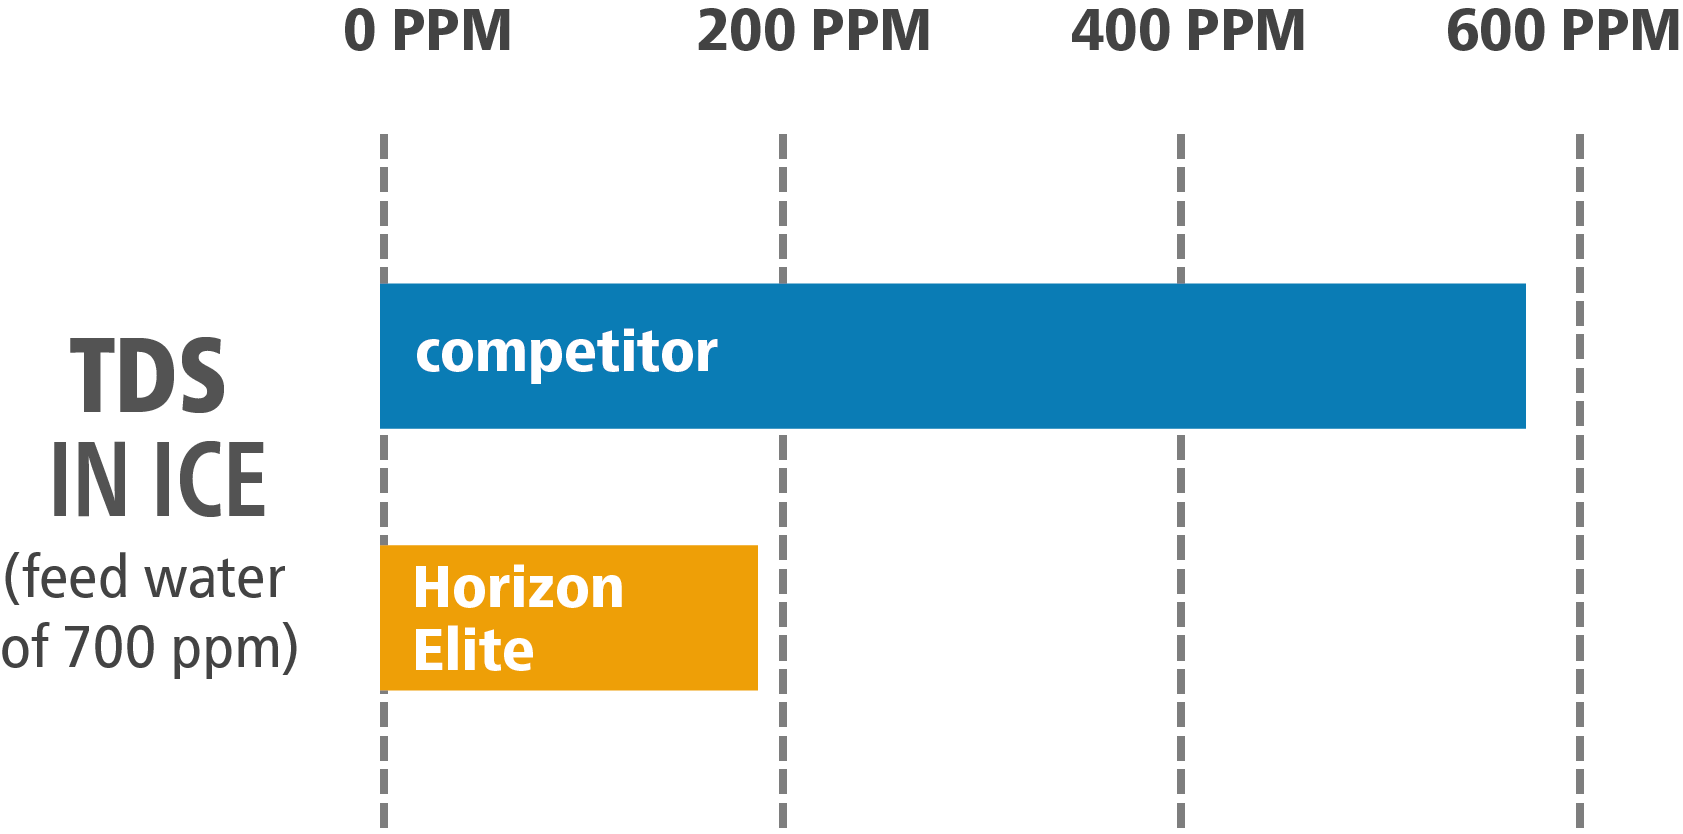 bar chart showing TDS in ice - competitor vs Horizon Elite